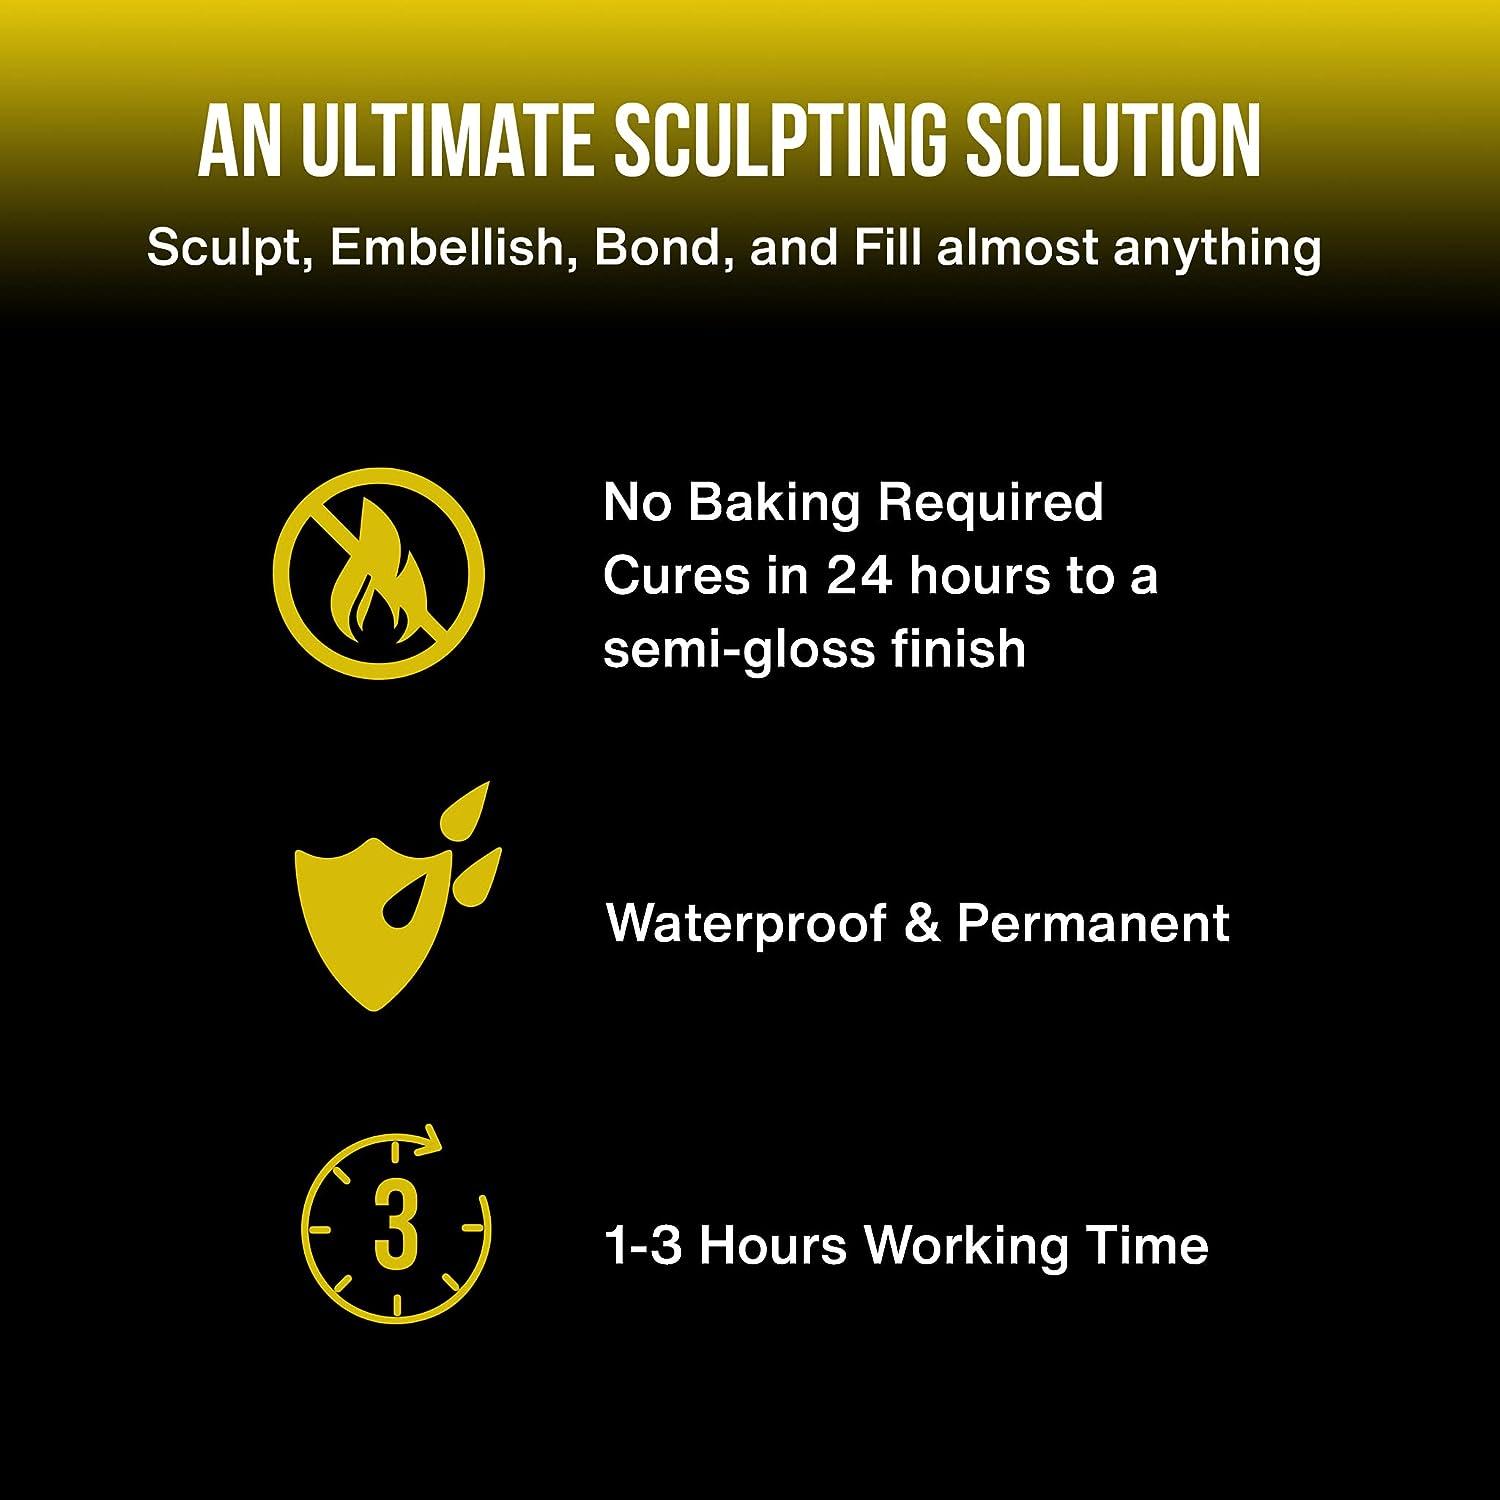 Apoxie Sculpt - Quick Guide for sculpting and repairing model kits 